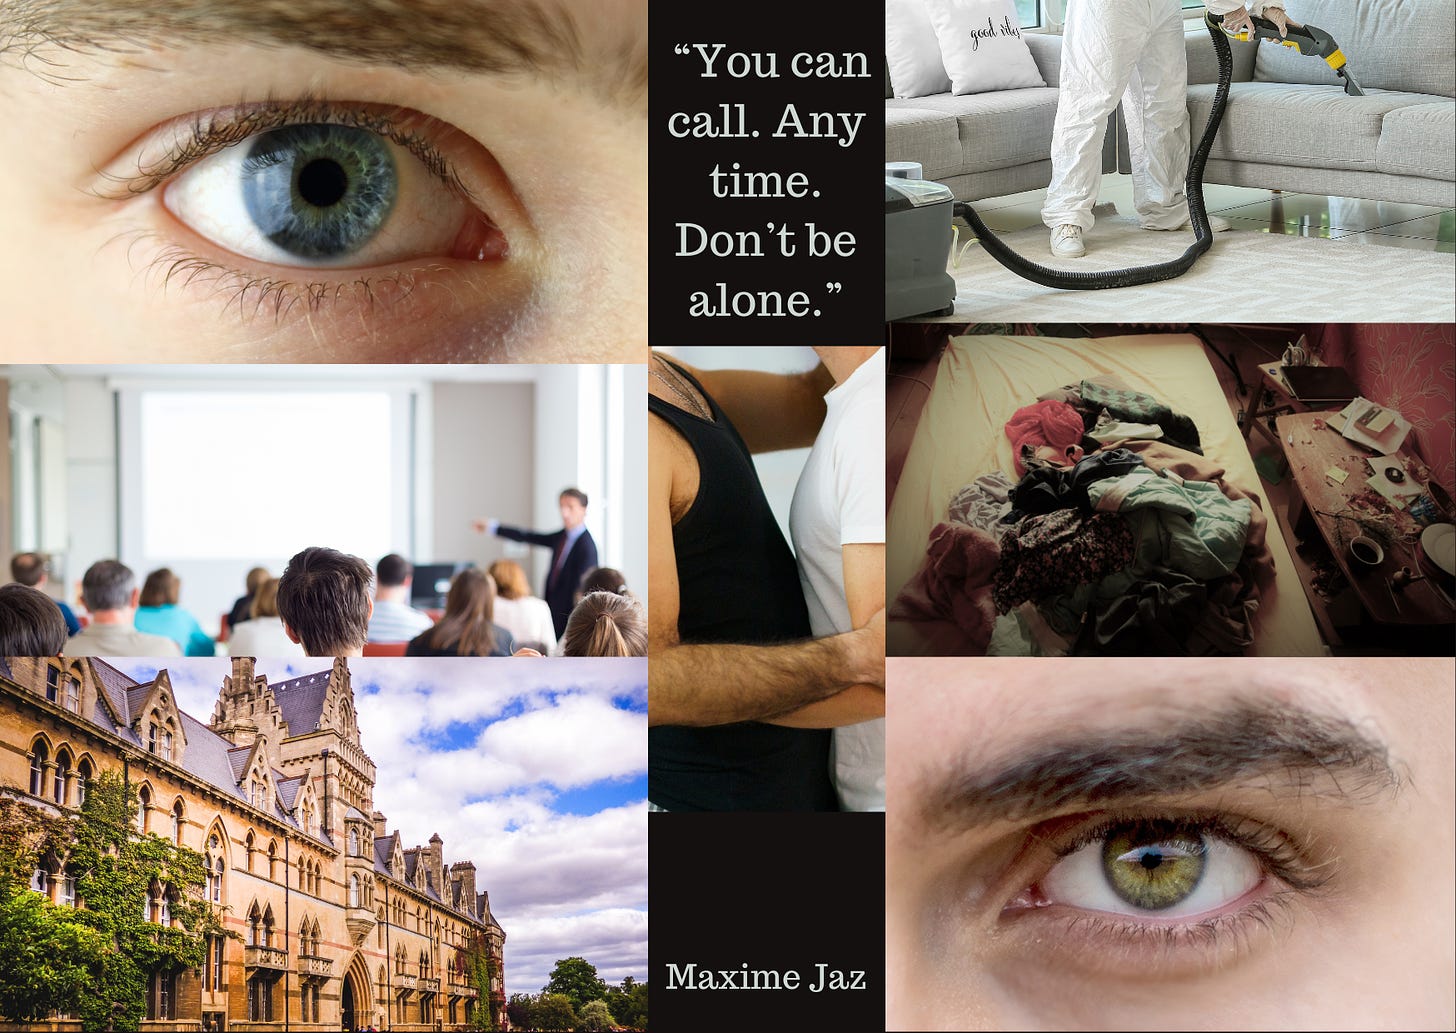 Moodboard for the MCs of my WIP. 3 pics on the left from top to bottom: a man's blue eye, a uni lecture hall, a uni building. Middle column a quote: "You can call. Any time. Don't be alone." Under it two men holding each other, under it Maxime Jaz written. On the right 3 pics, top to bottom: a man in a biohazard suit cleaning a sofa, a messy, dirty room, a man's green eye.